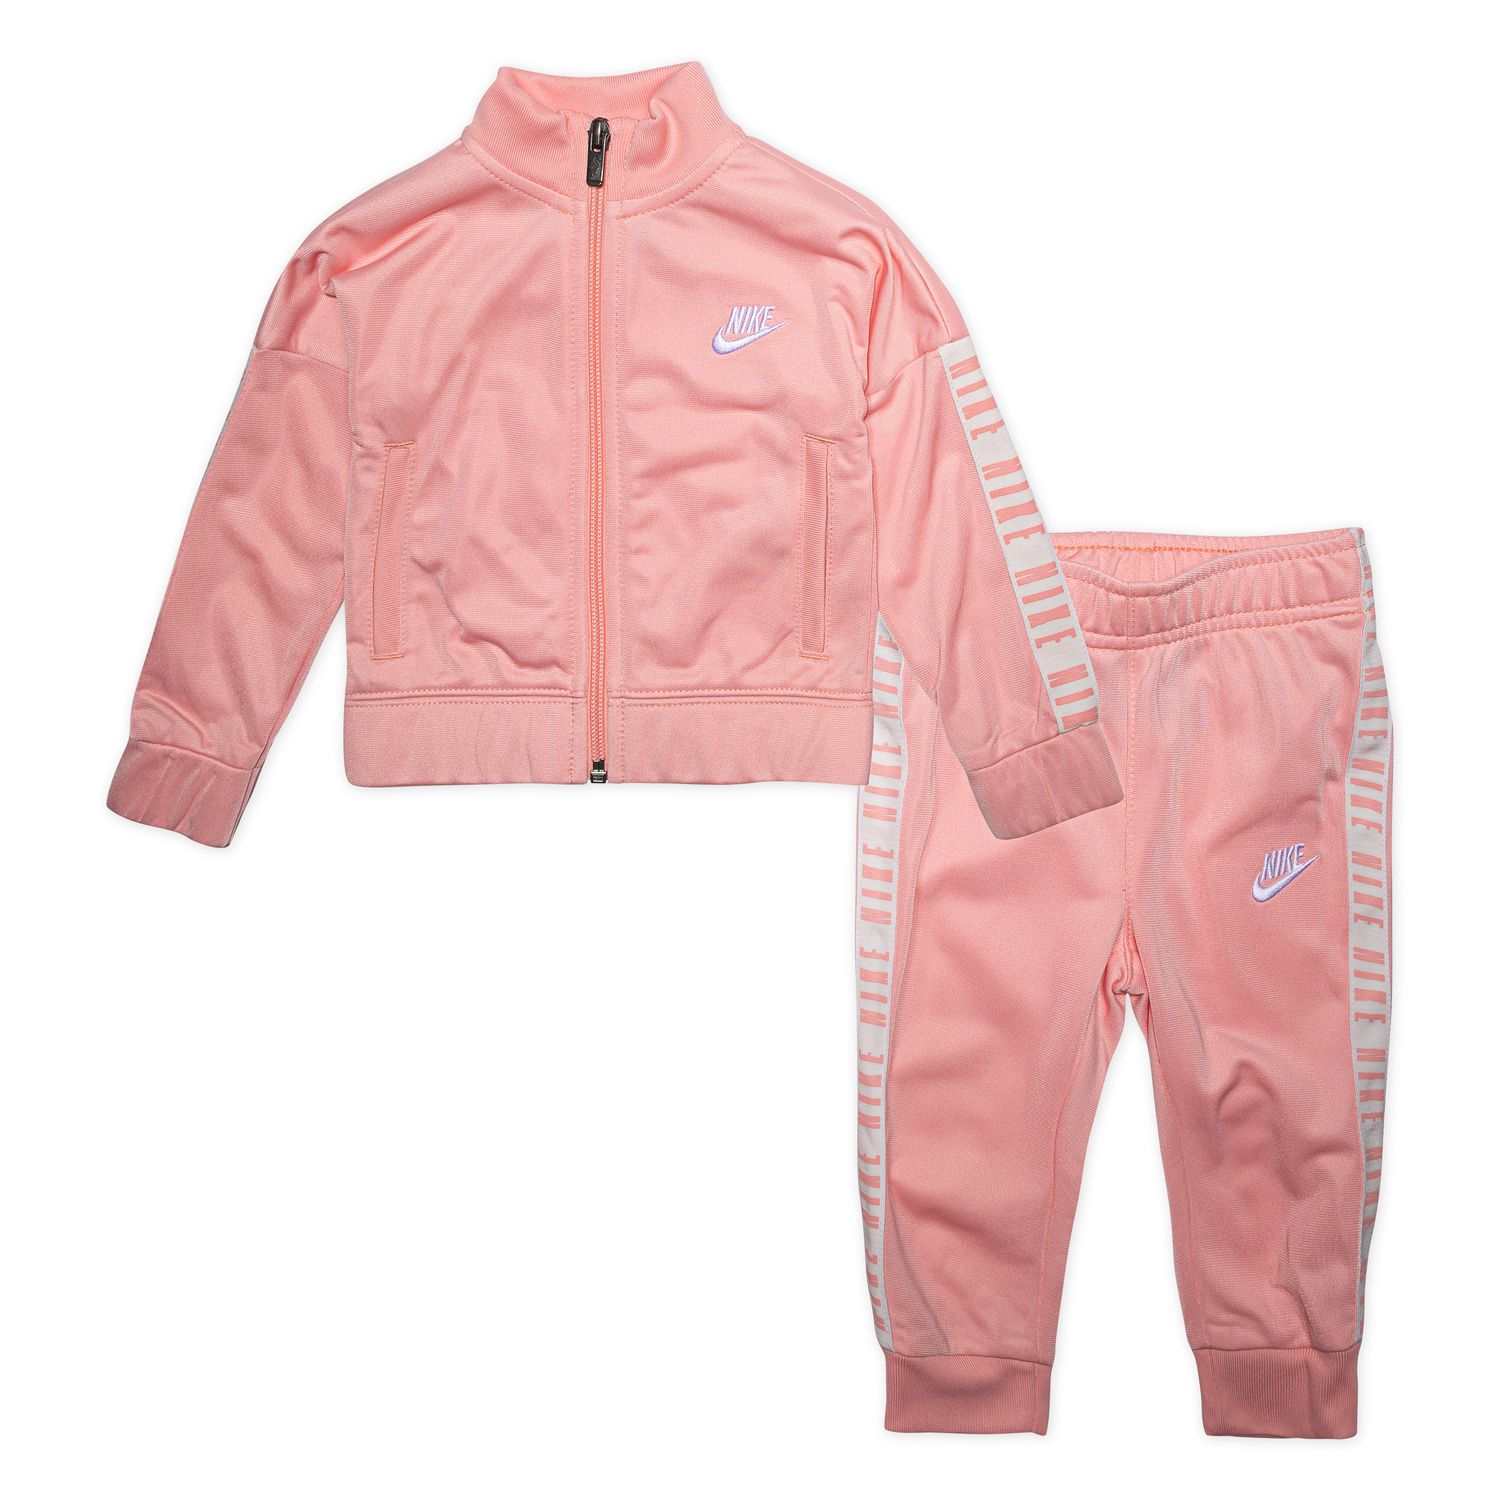 12 month nike girl outfits